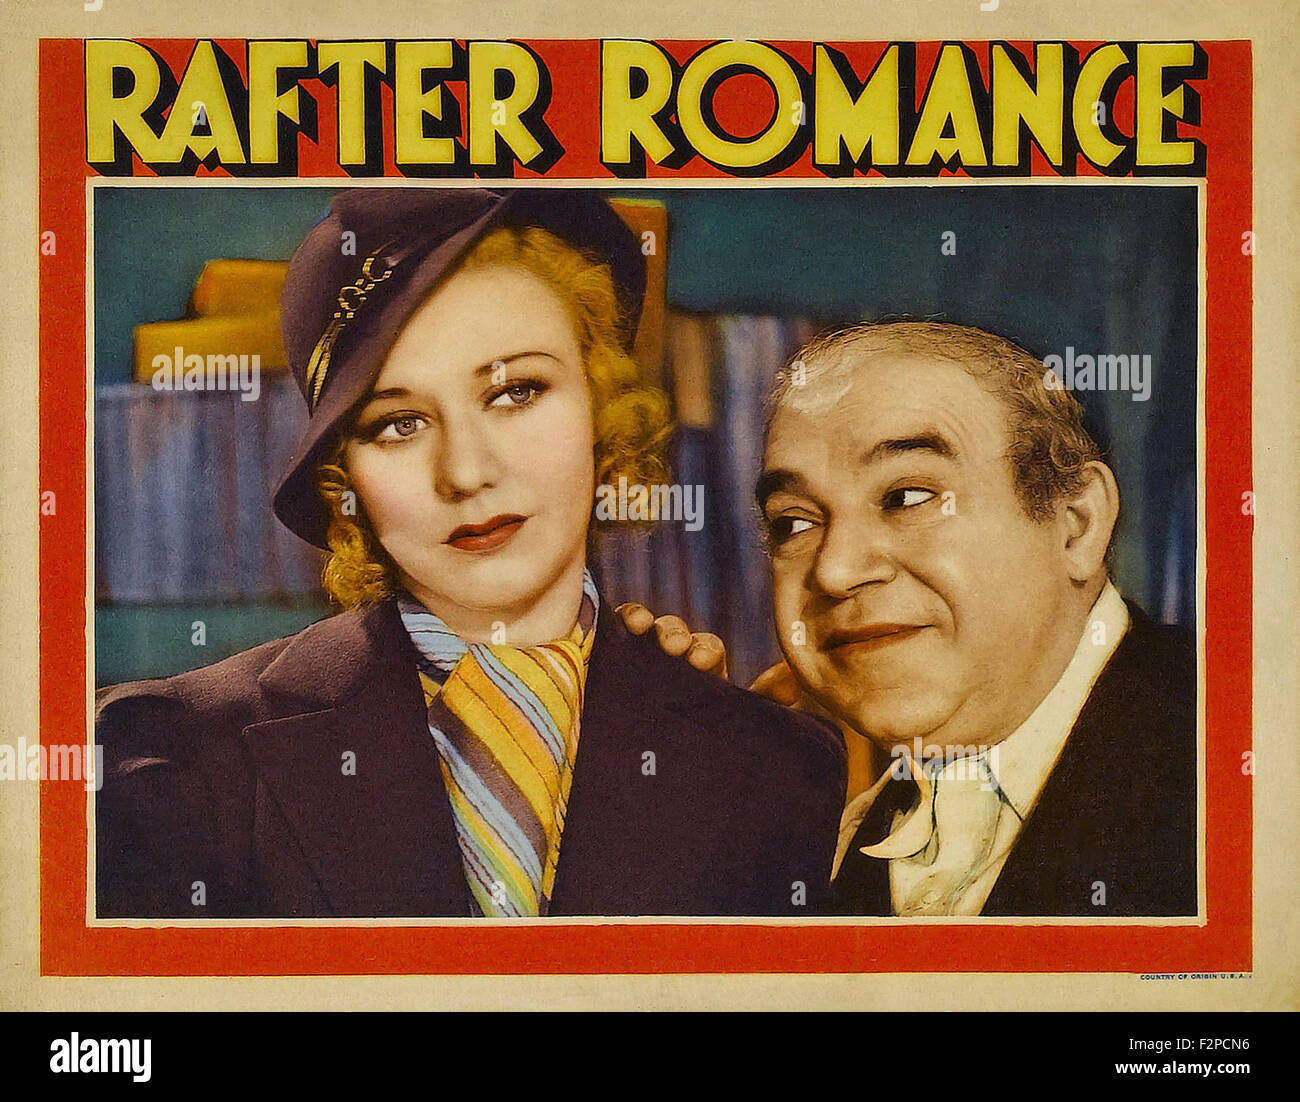 Rafter Romance - Film Poster Banque D'Images